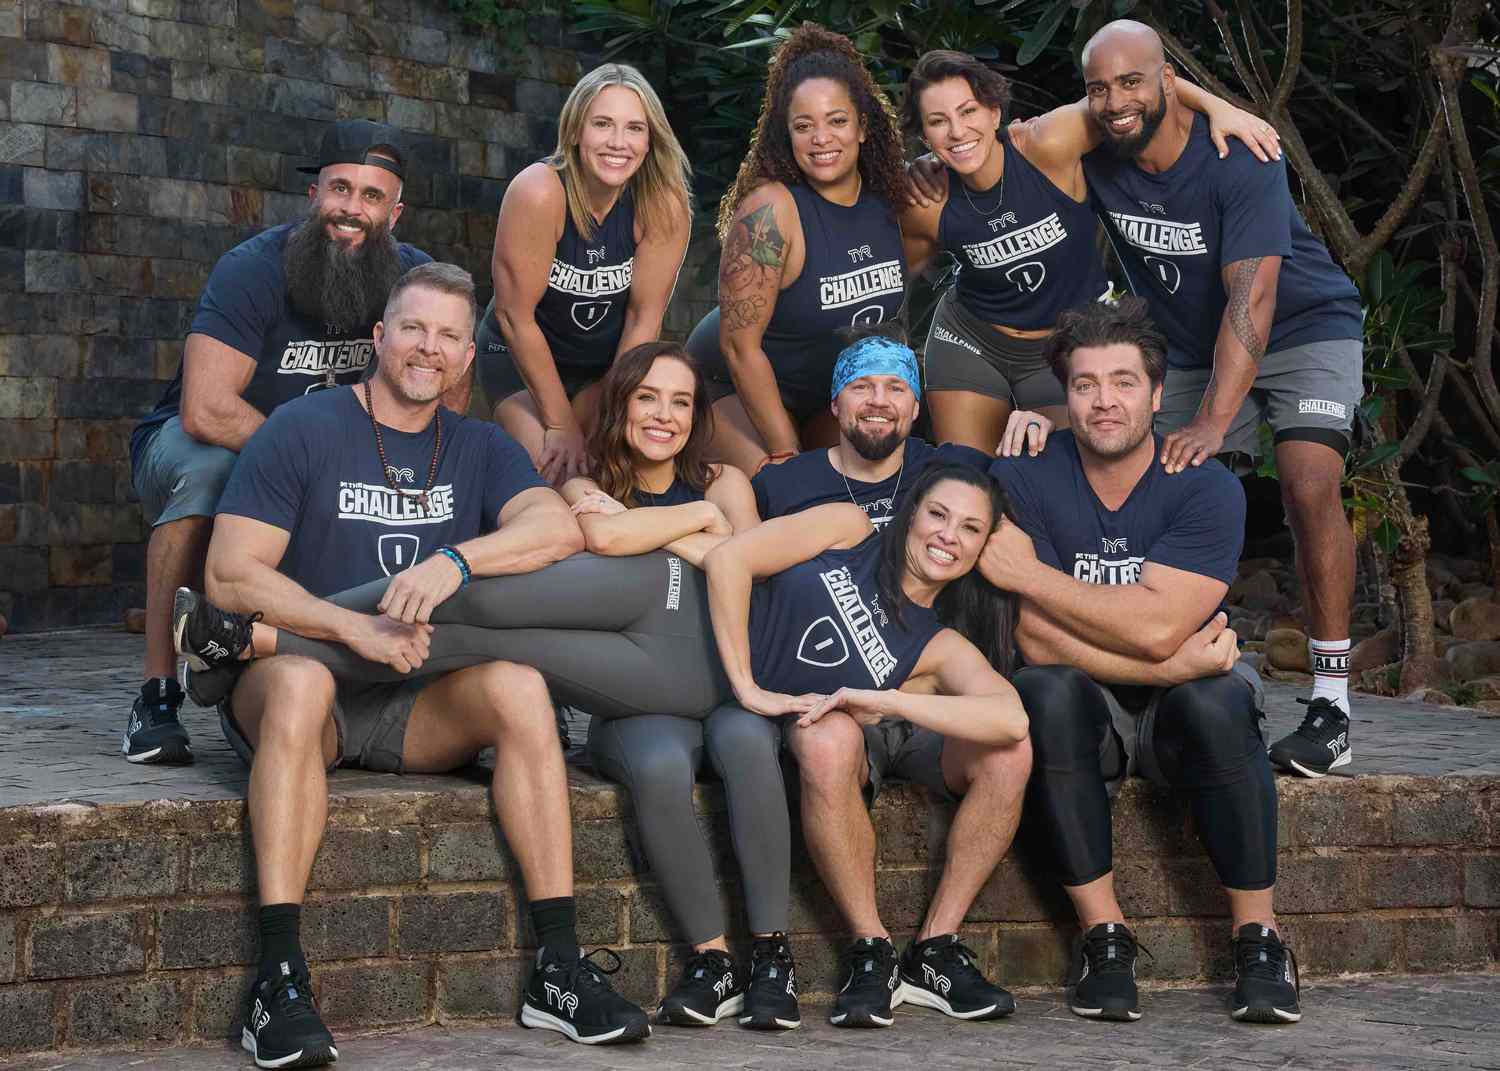 MTV's "The Challenge" Embarks on Its Monumental 40th Season Premiering Wednesday, August 14th